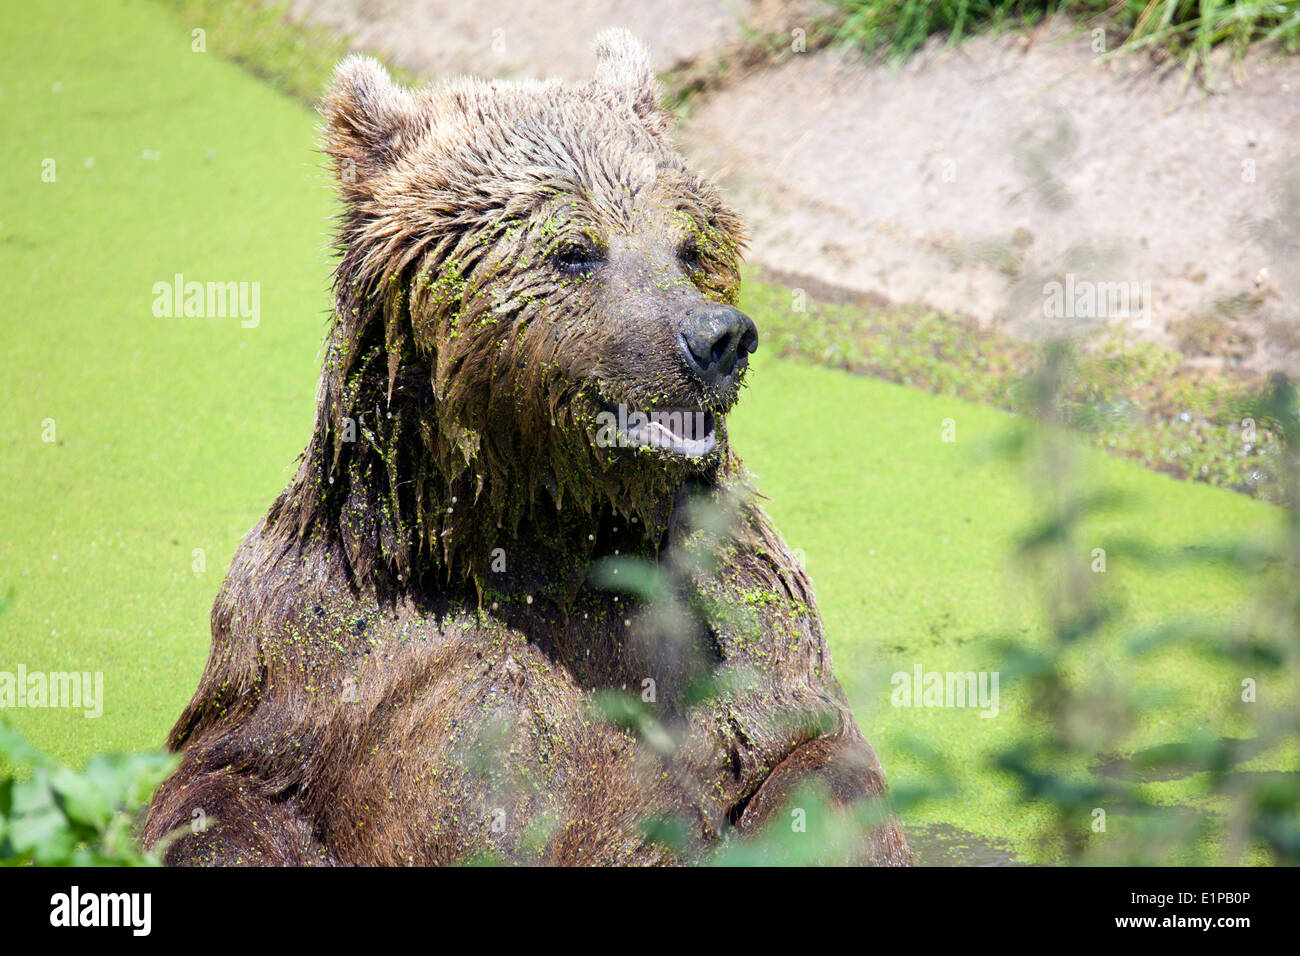 A Eurasian Brown Bear sitting in an aldae filled swamp Stock Photo